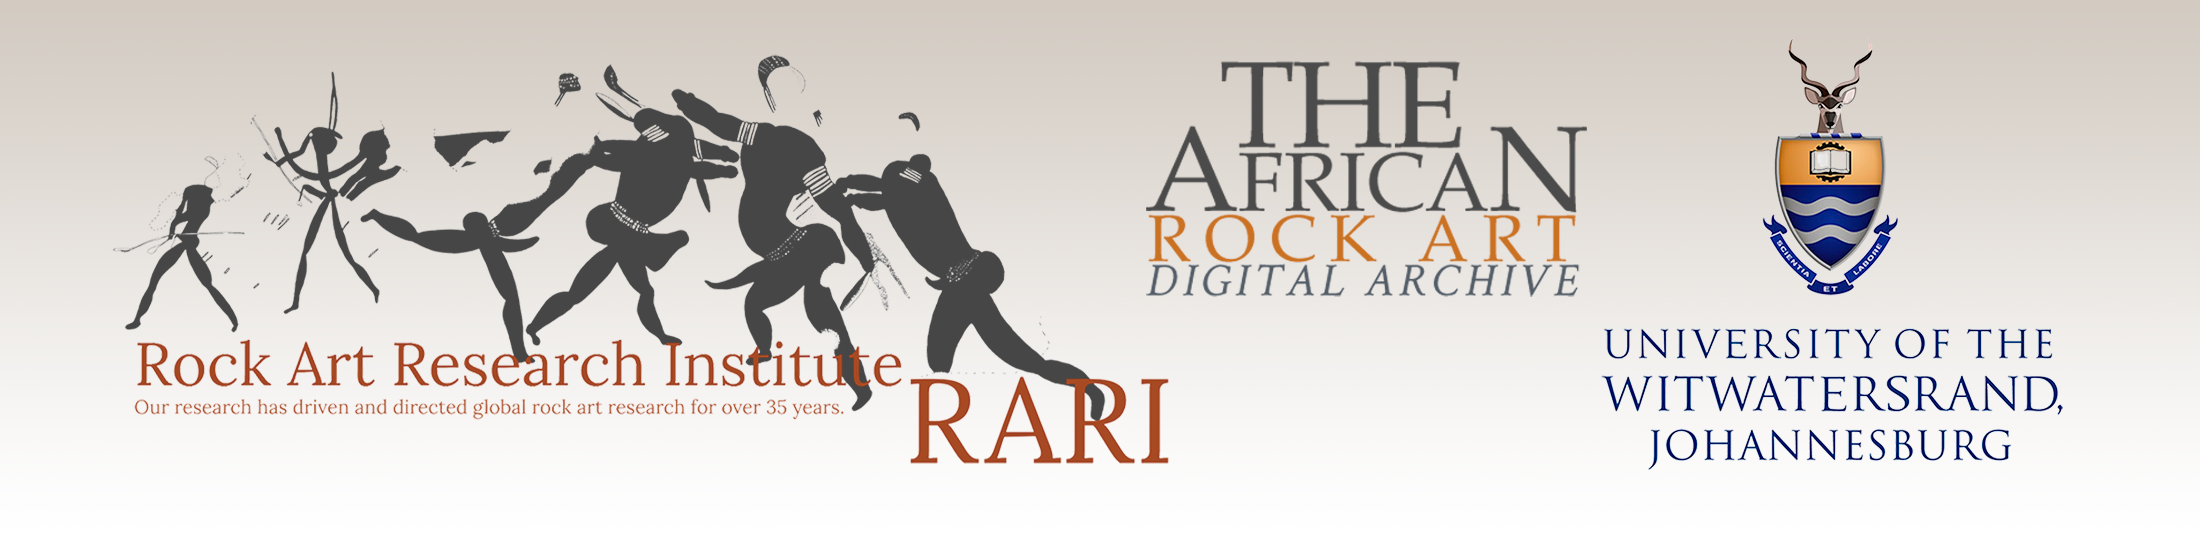 RARI Rock Art Research Institute The African Rock Art Digital Archive Witwatersrand University South Africa